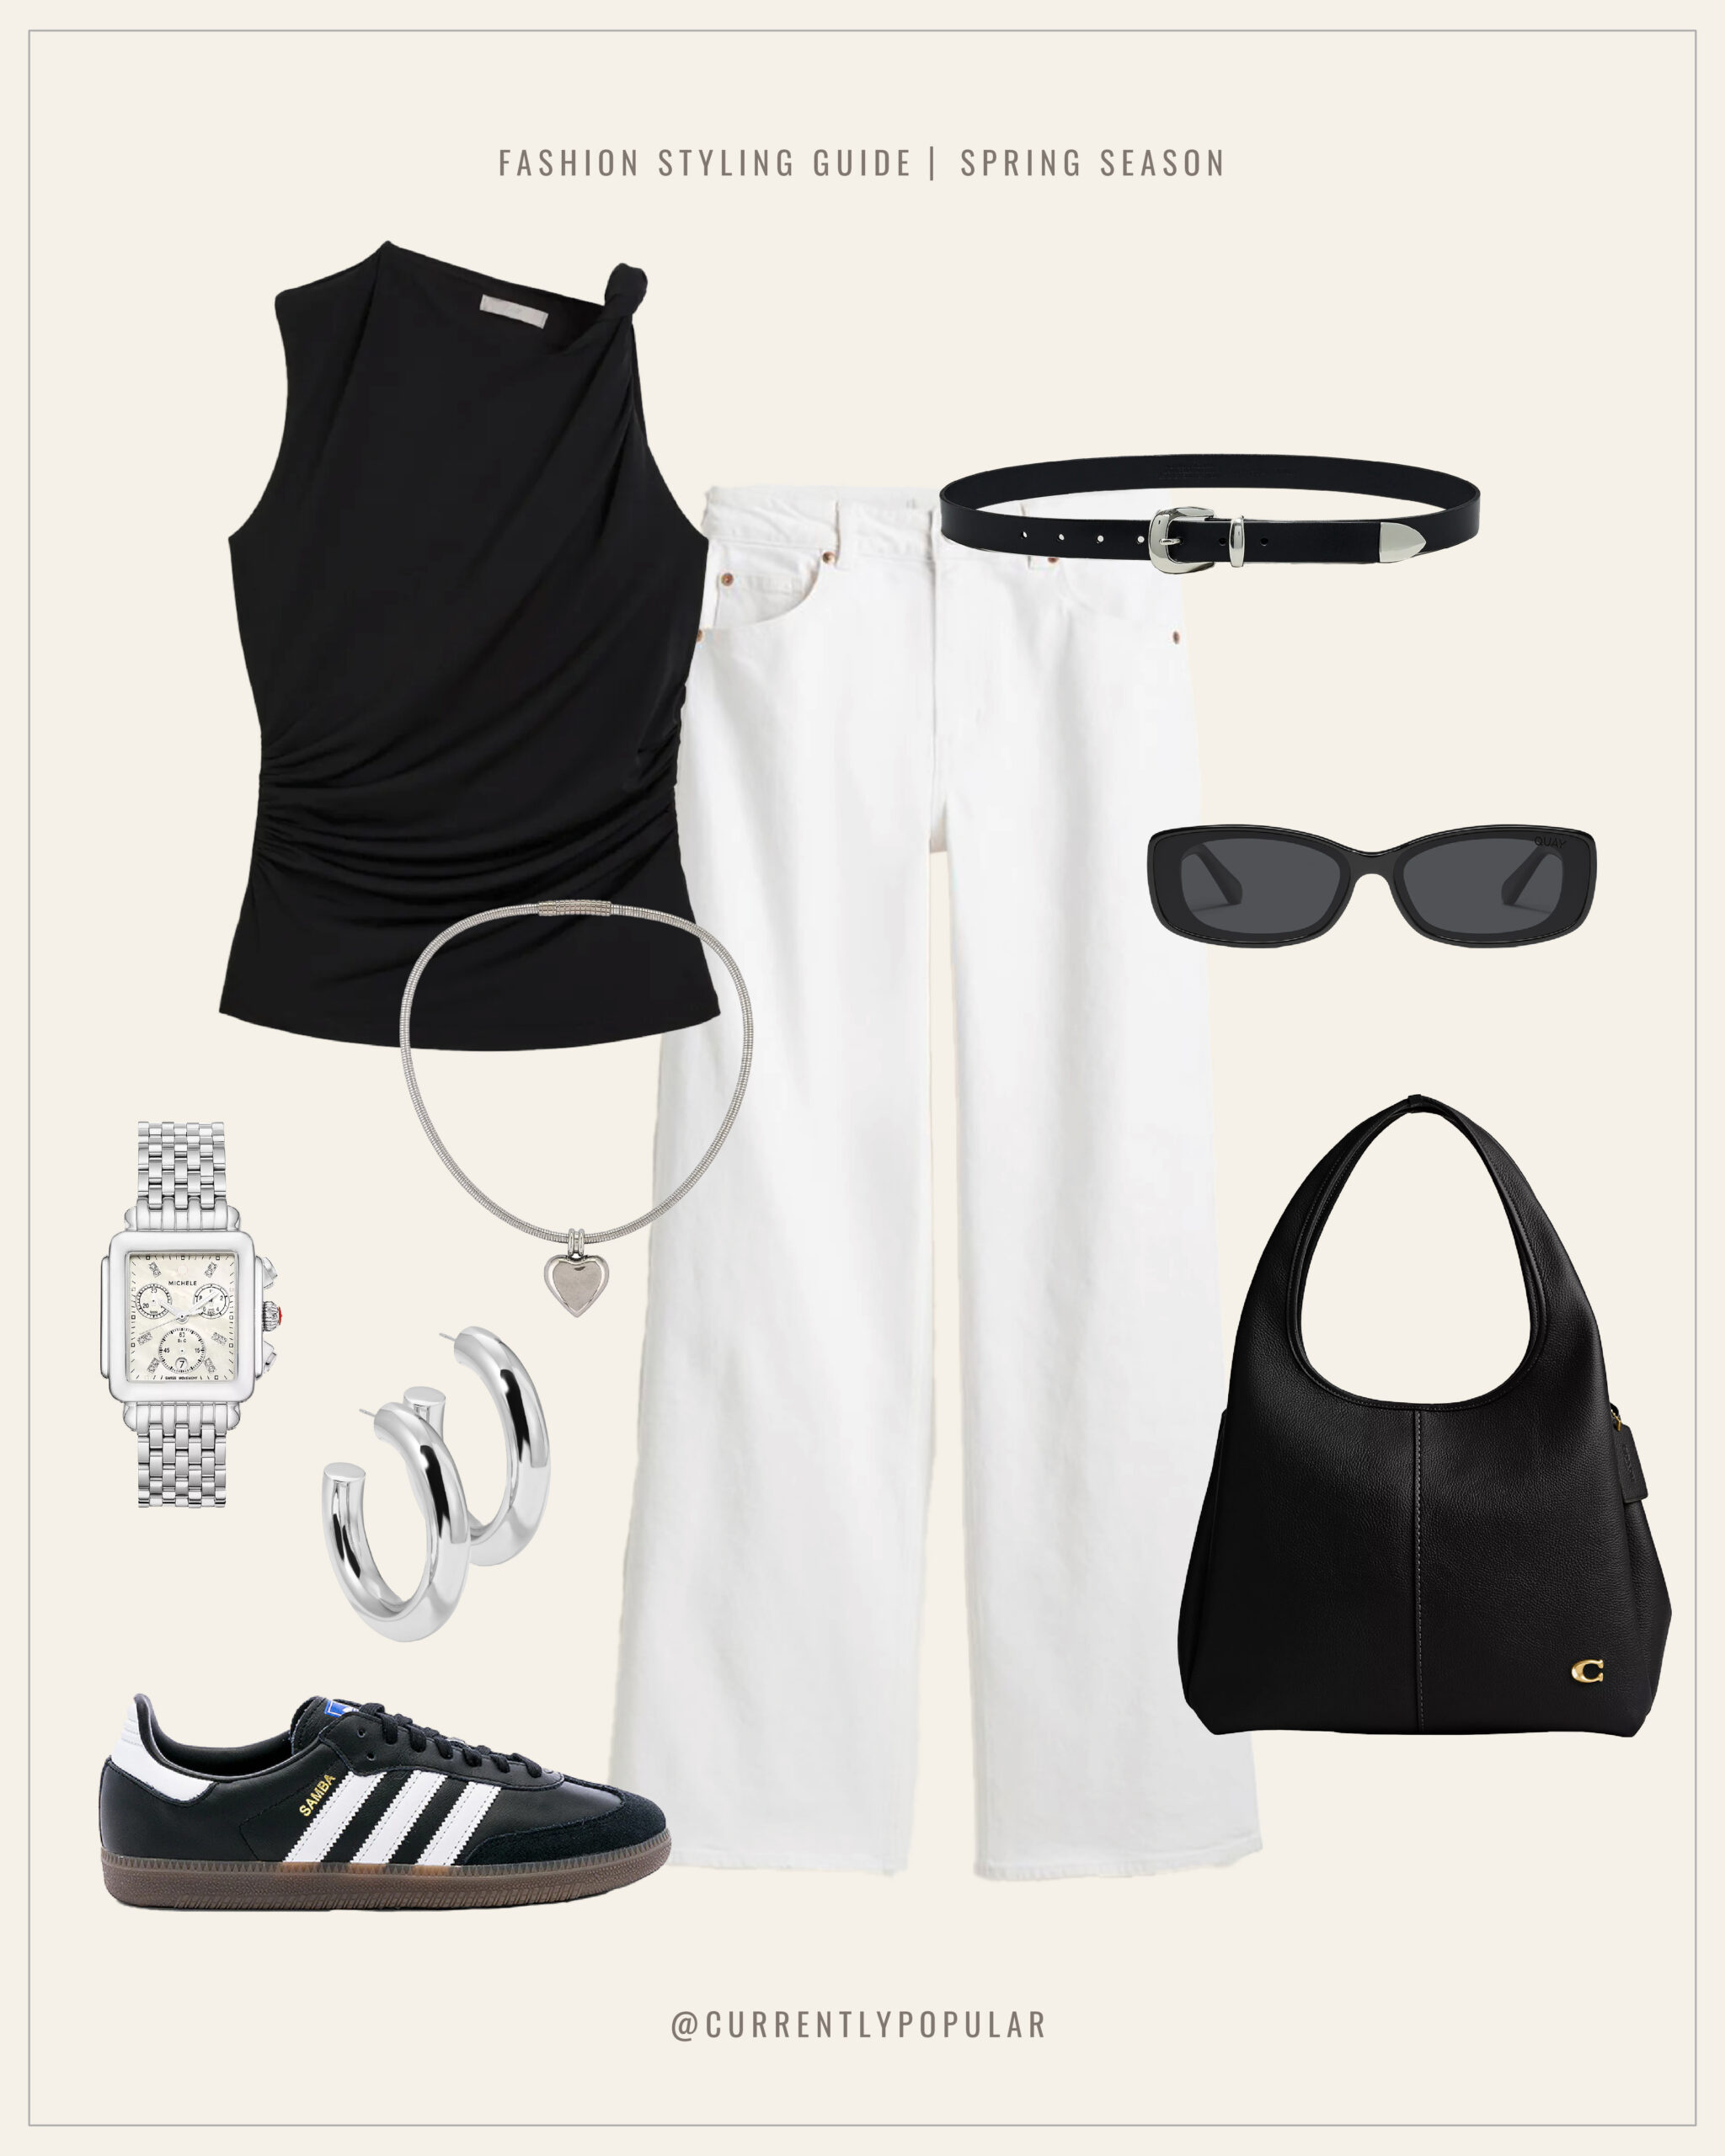 Fashion styling guide for the spring season featuring a modern monochrome ensemble. The outfit includes a black twisted tank top with a draped design, paired with crisp white wide-leg pants and a black belt with a silver buckle. Accessories comprise a silver watch with a square face, silver hoop earrings, black sunglasses, and classic black sneakers with white stripes. The look is completed with an elegant black leather handbag. The text '@currentlypopular' indicates the source of the fashion guide.